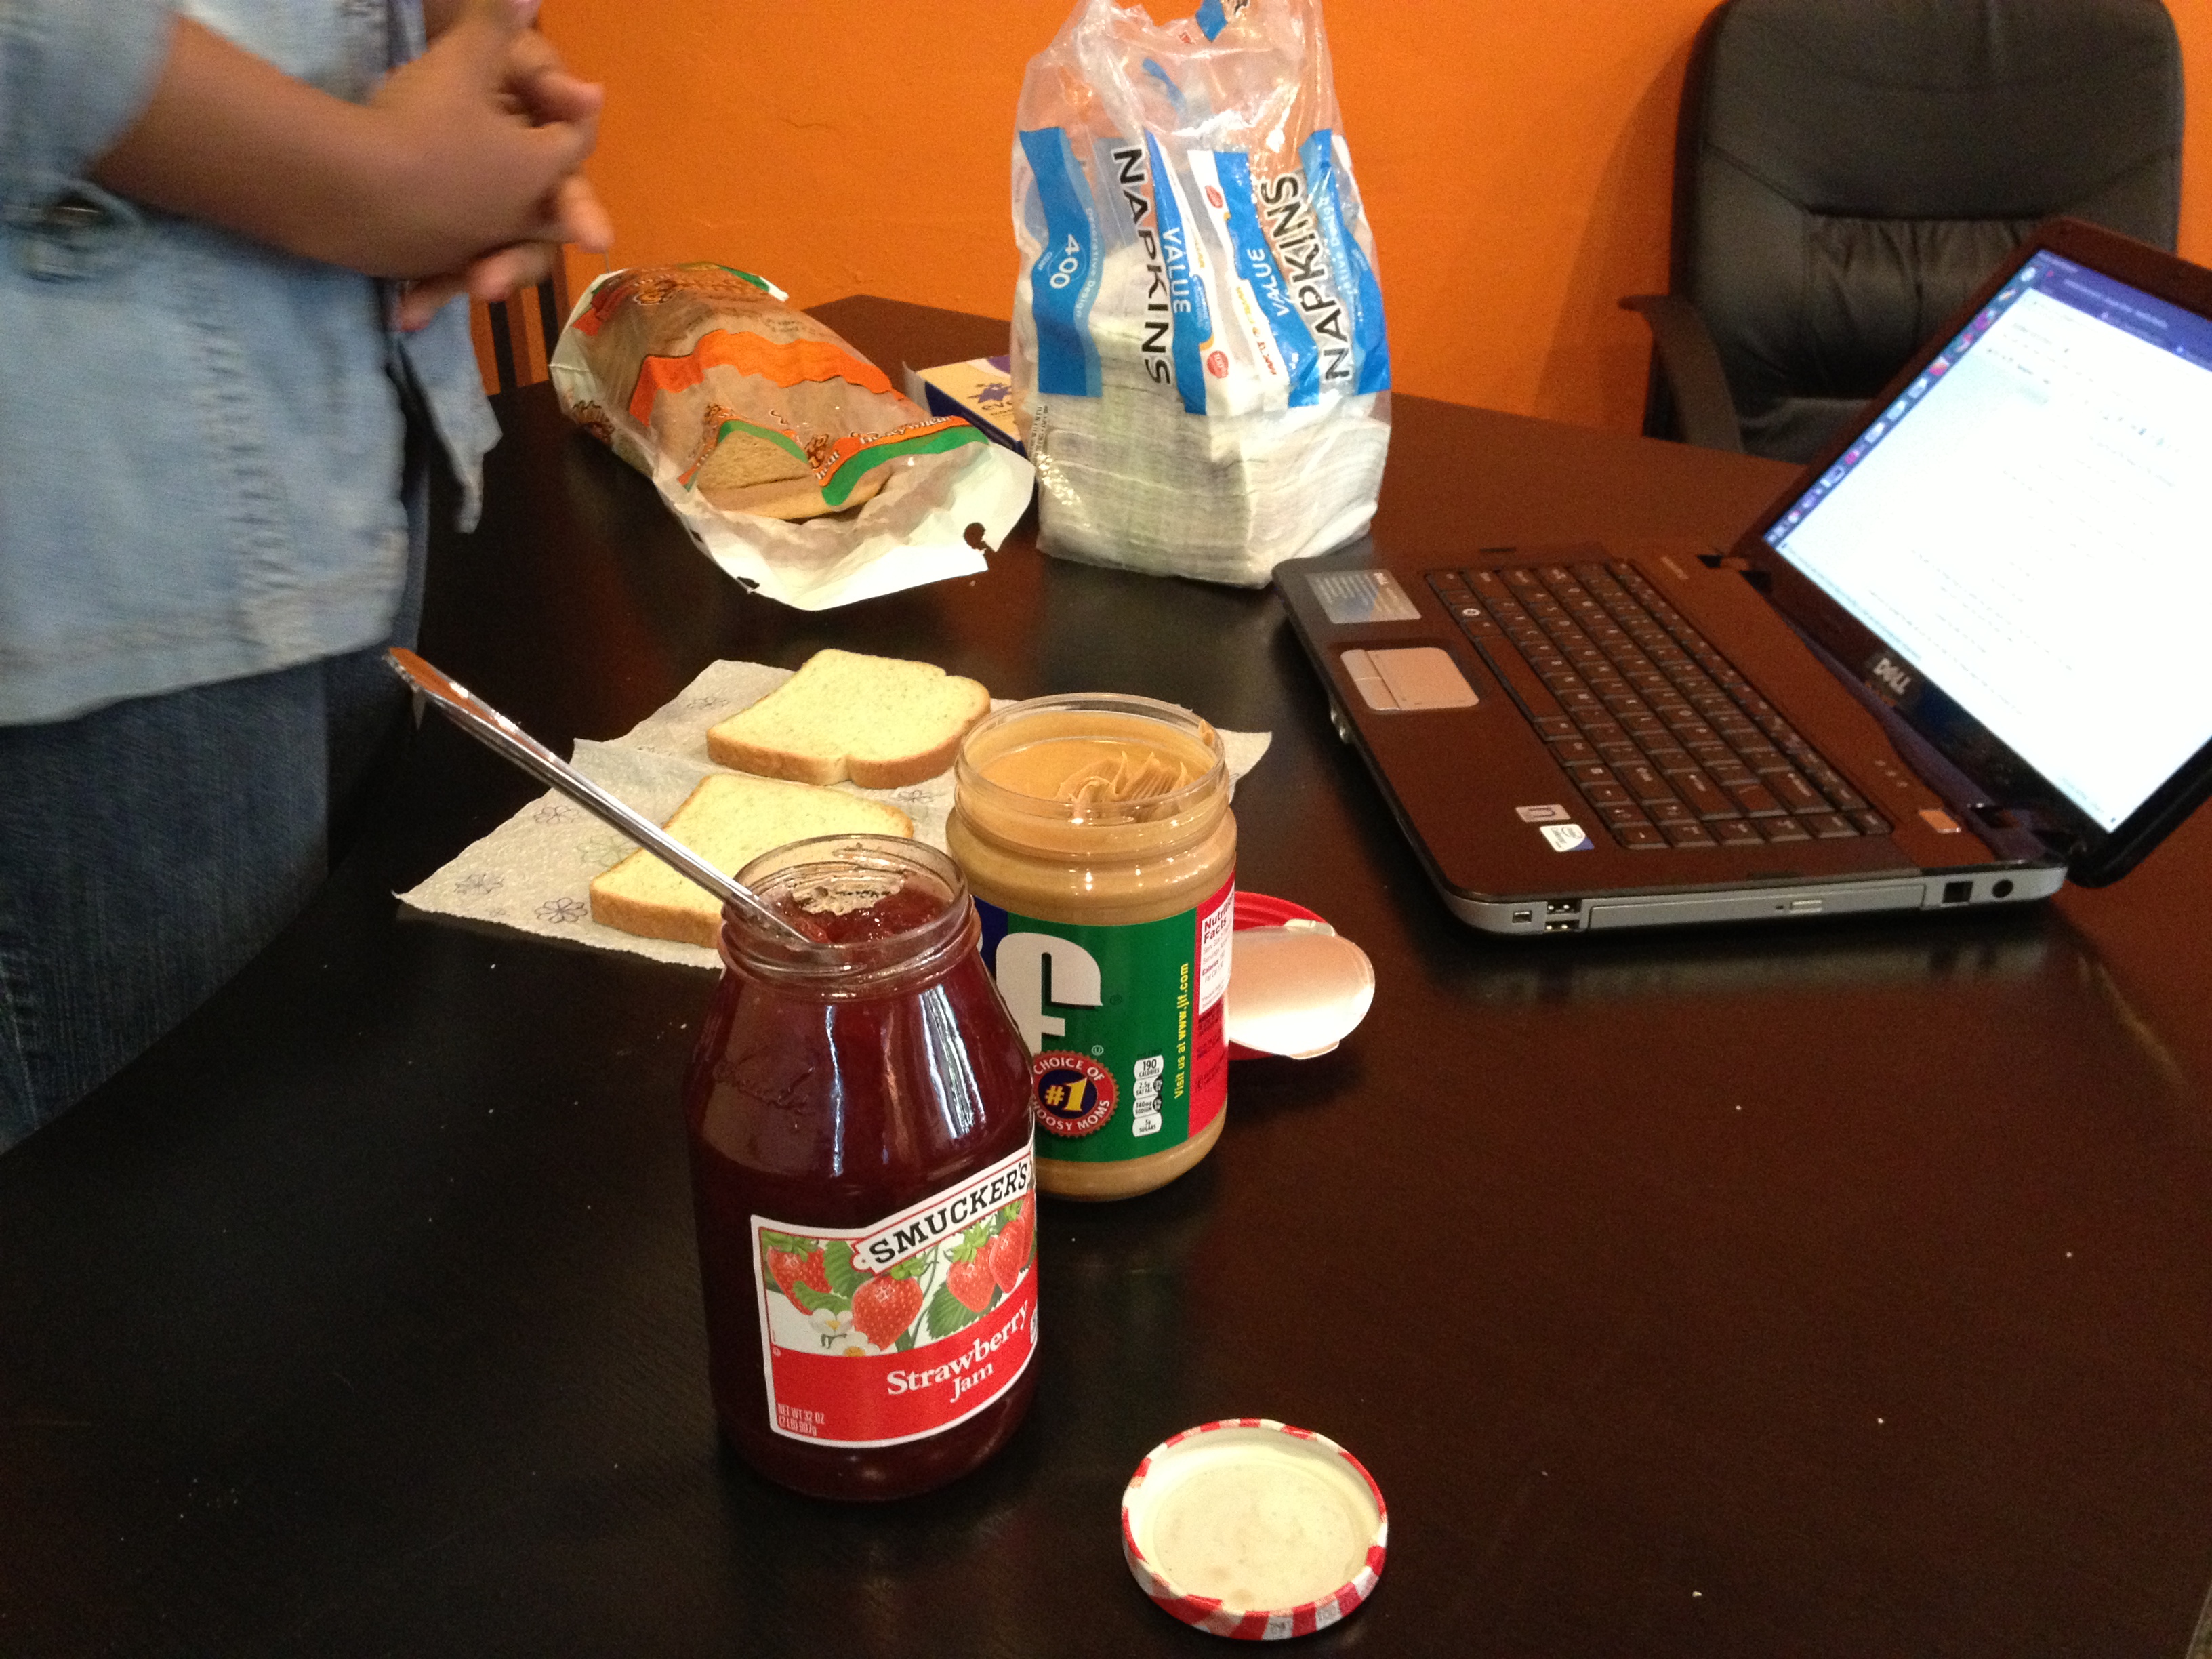 Chavez Fellows complete the peanut butter & jelly activity to learn concepts in computer programming